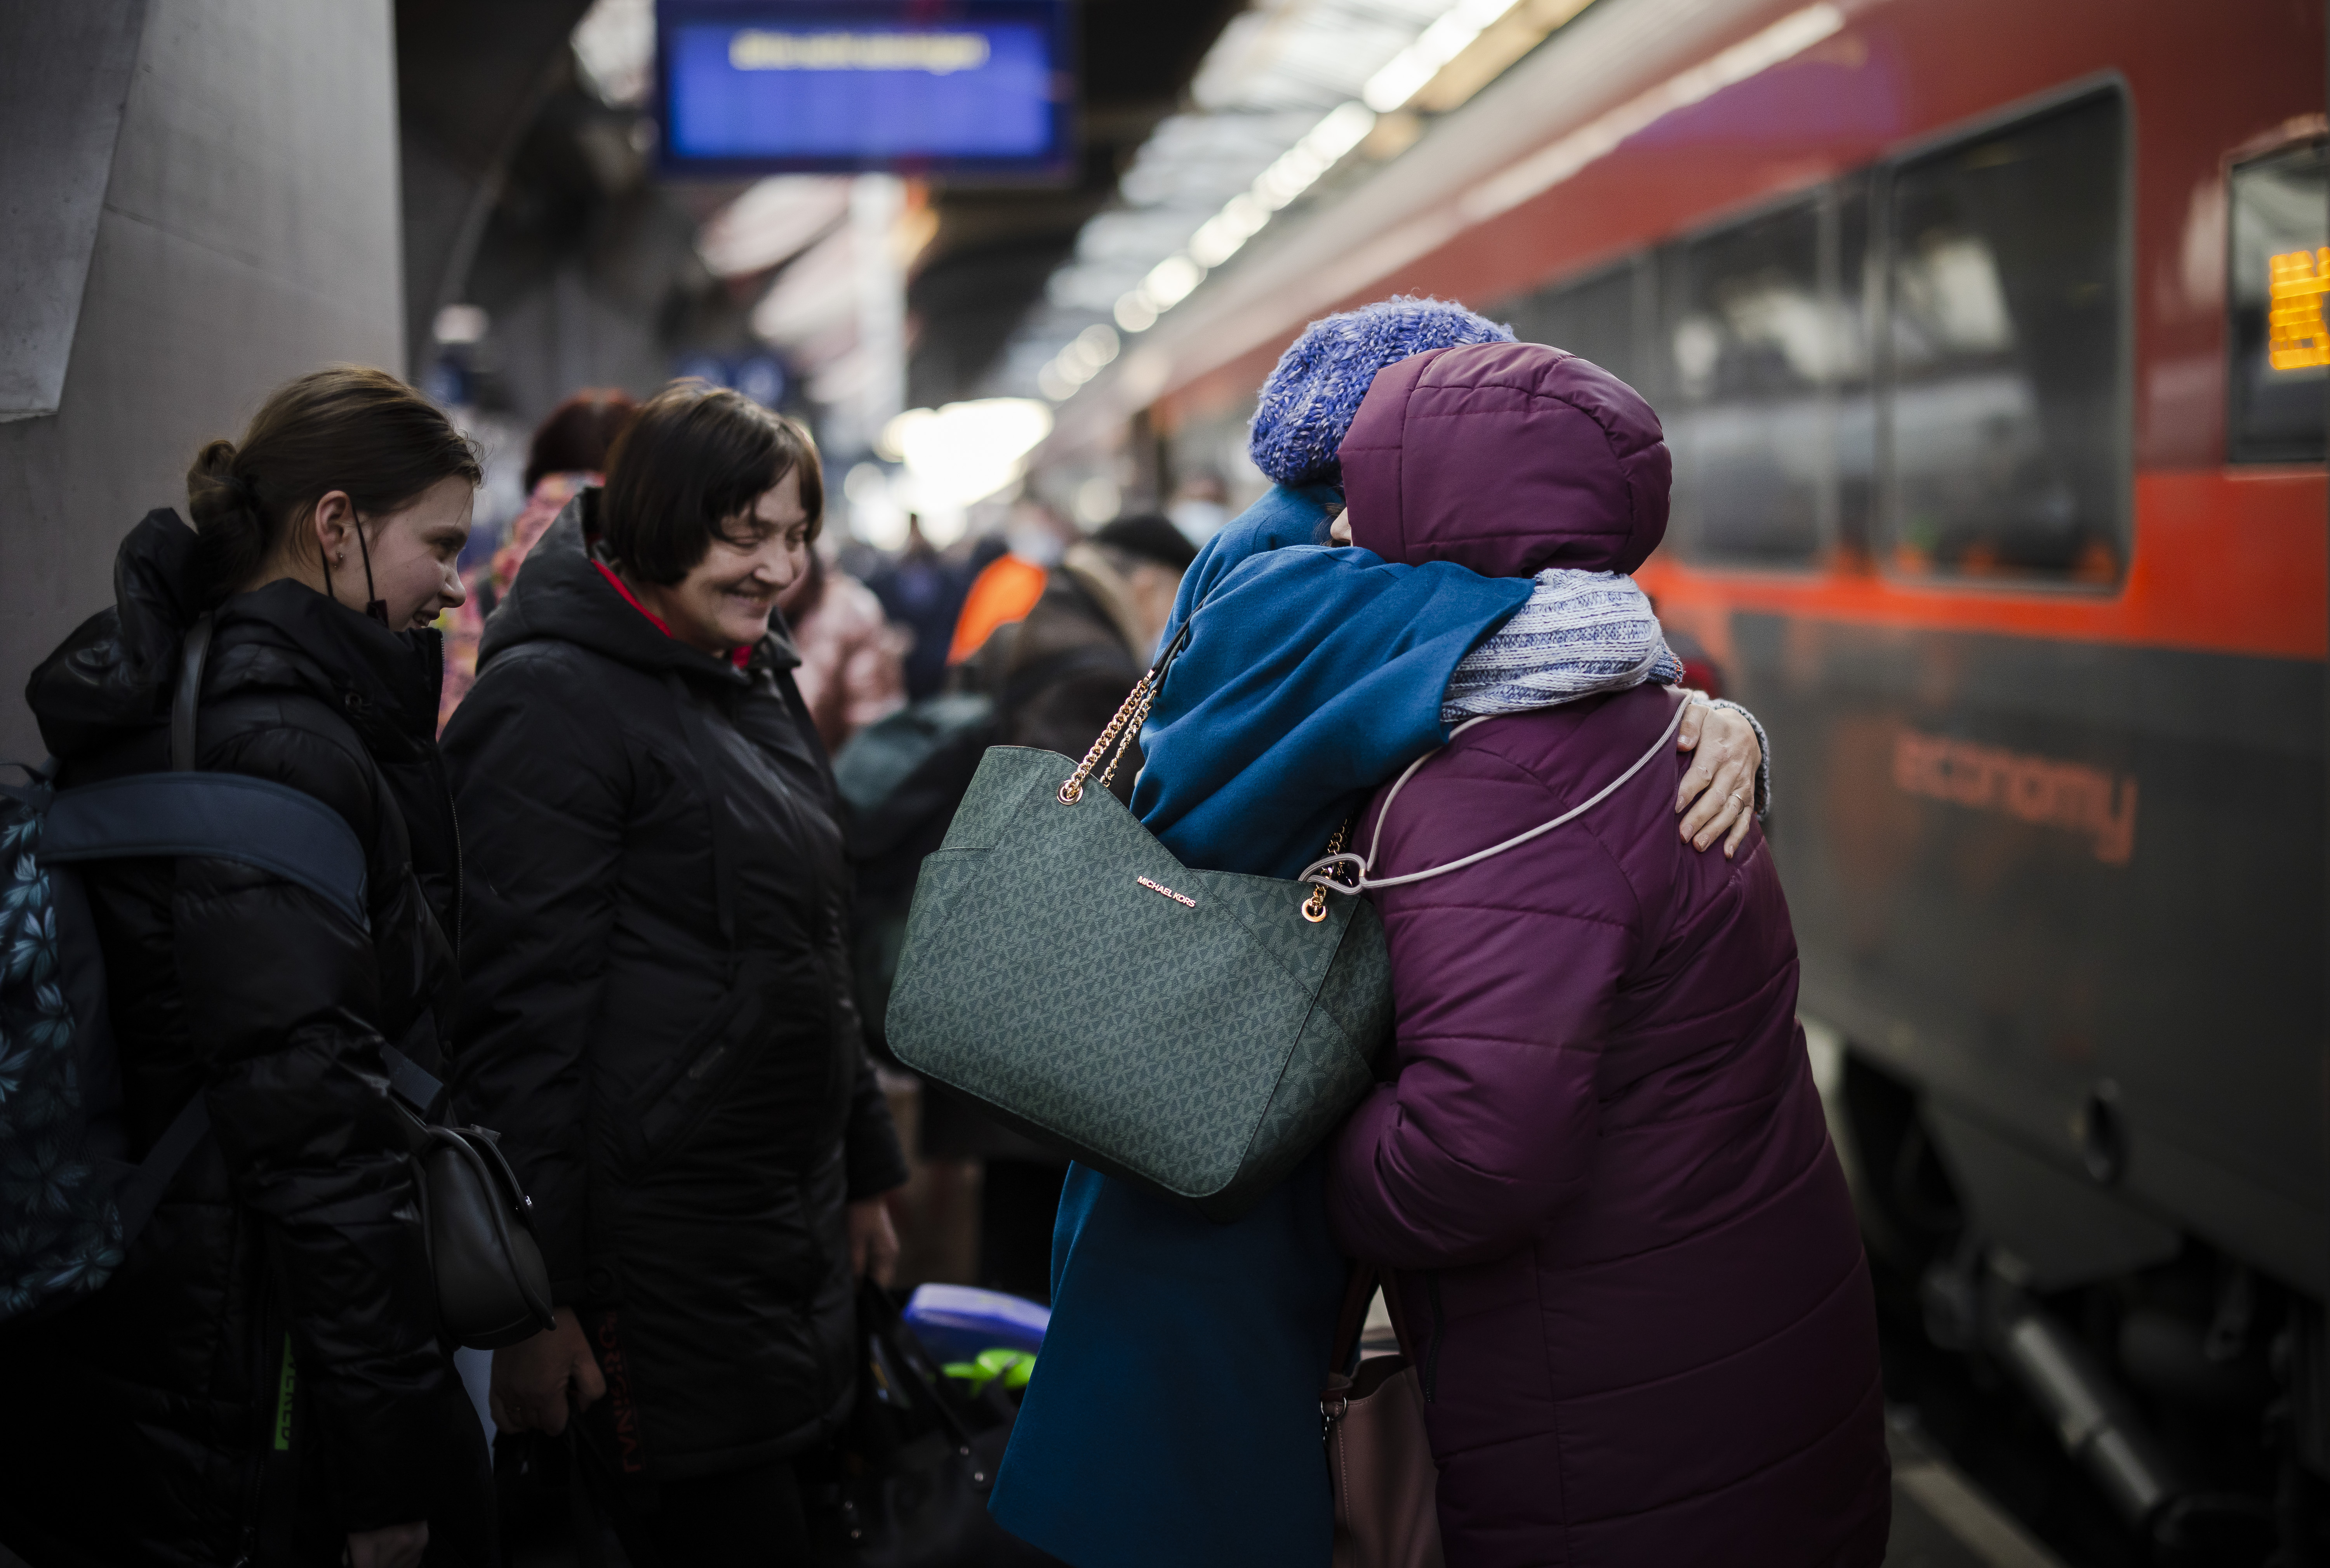 A woman from Ukraine reacts as she receives a hug after her arrival at Zurich's central station, following Russia's invasion of Ukraine, in Zurich, Switzerland, 09 March 2022. 